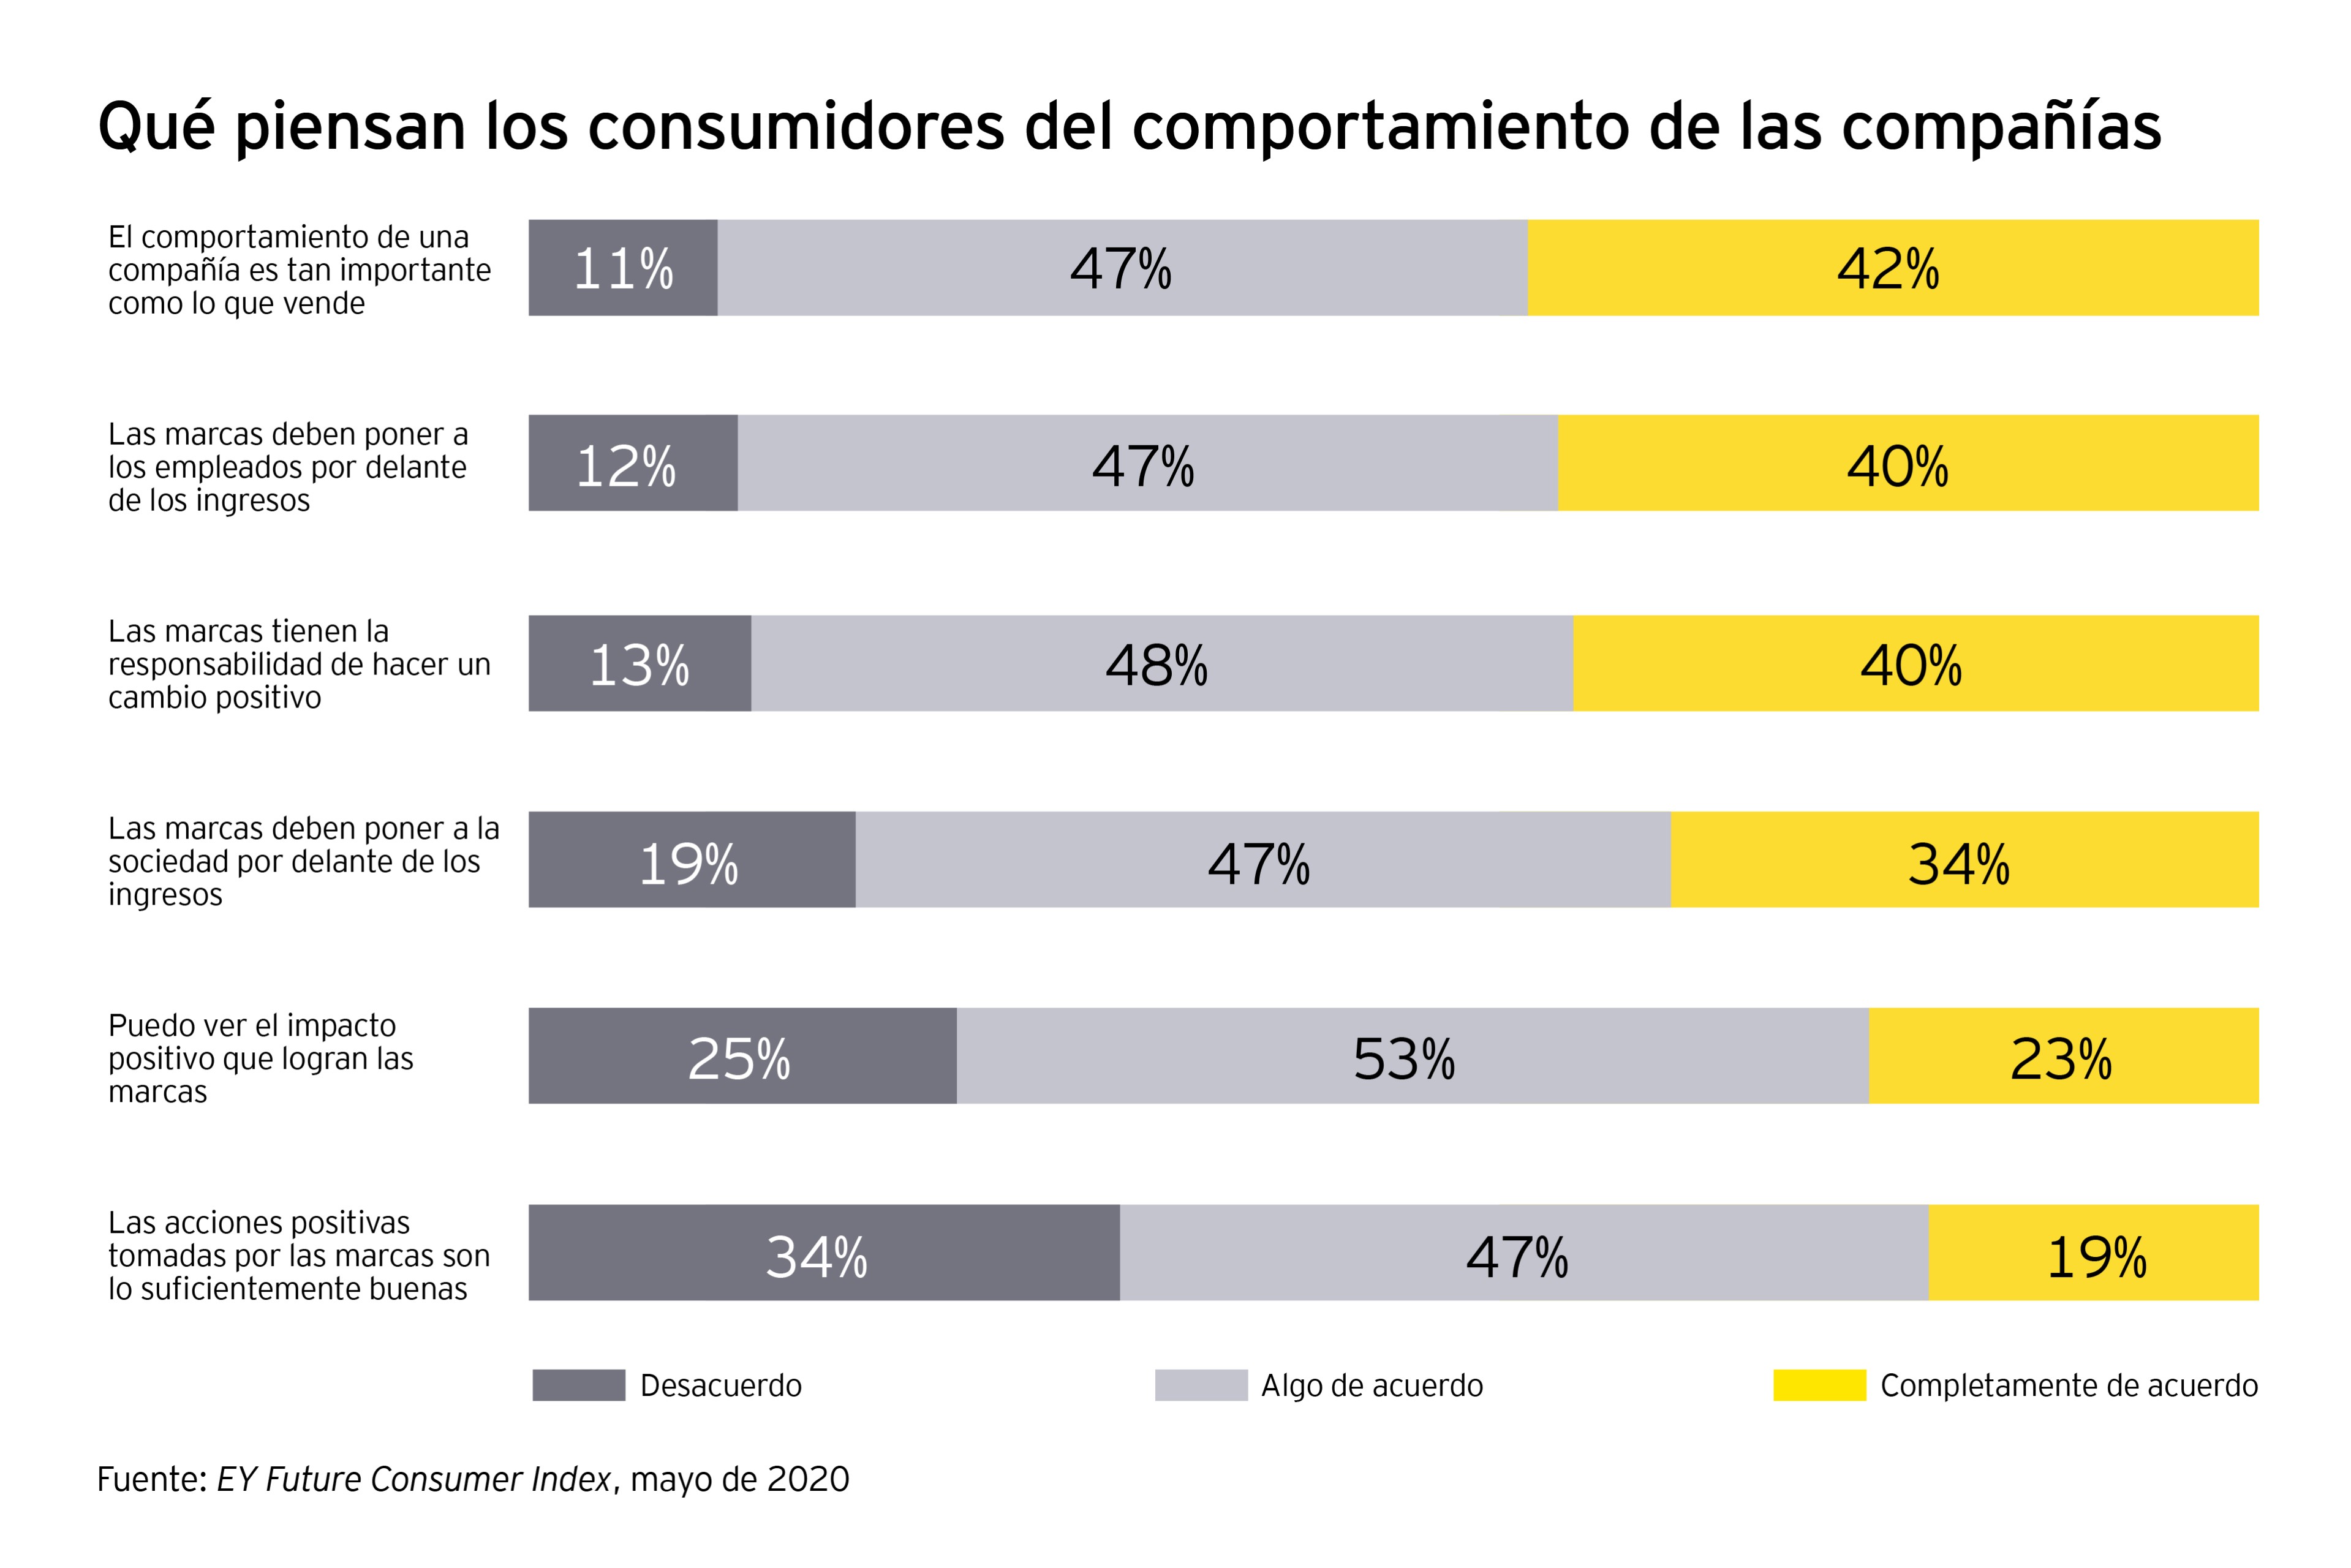 ey-what-consumers-think-of-company-behavior-v2.jpg.rendition.3840.2560_esp